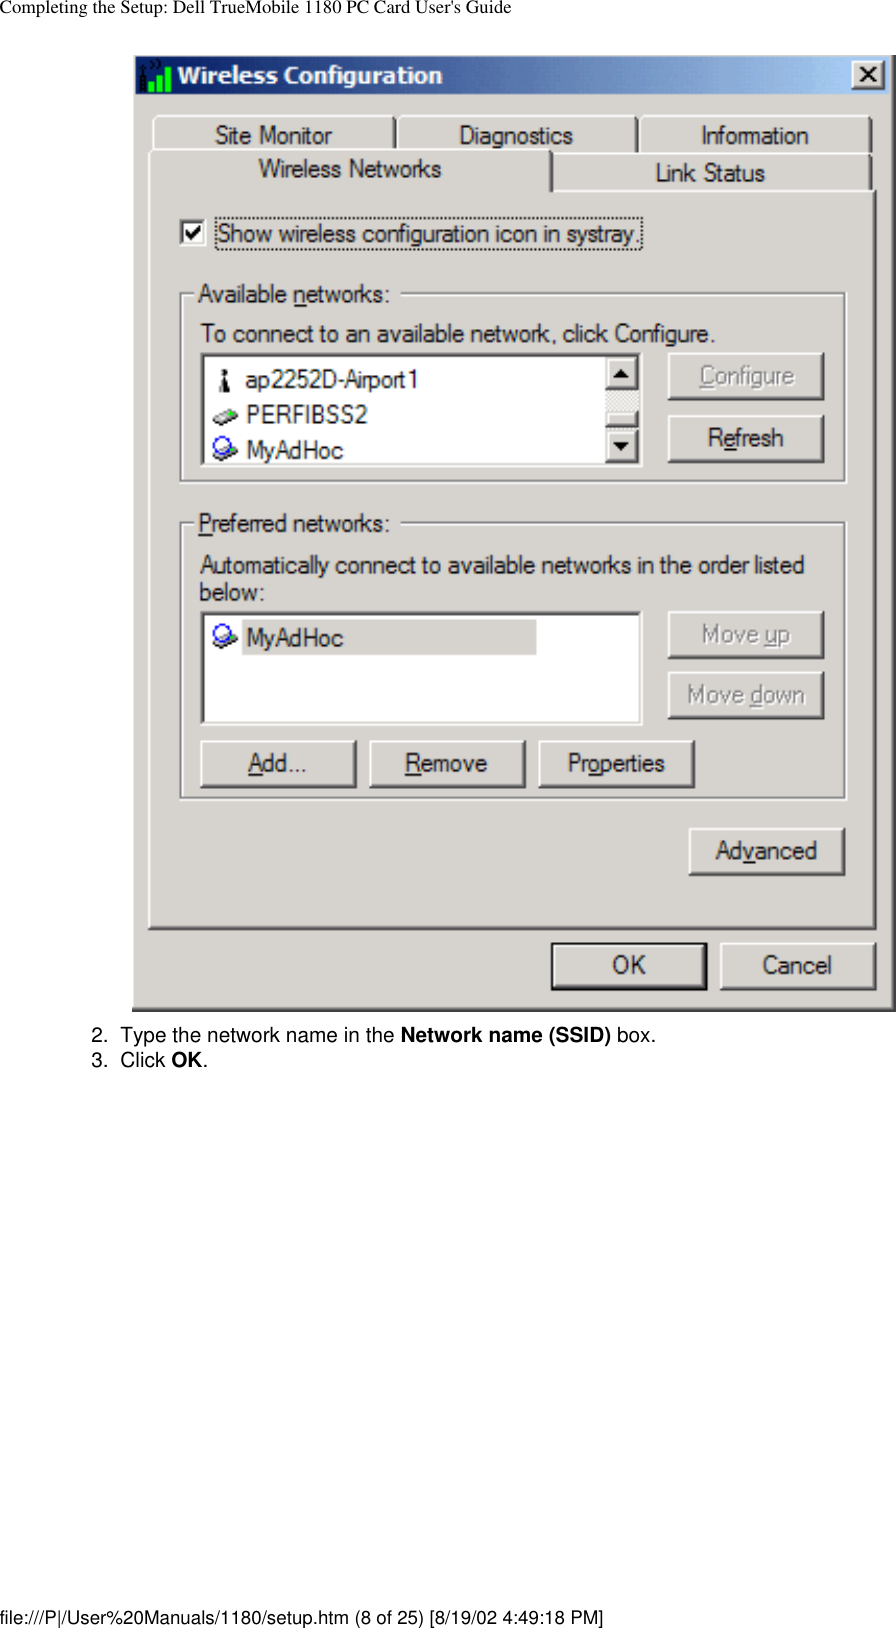 Completing the Setup: Dell TrueMobile 1180 PC Card User&apos;s Guide2.  Type the network name in the Network name (SSID) box.3.  Click OK. file:///P|/User%20Manuals/1180/setup.htm (8 of 25) [8/19/02 4:49:18 PM]